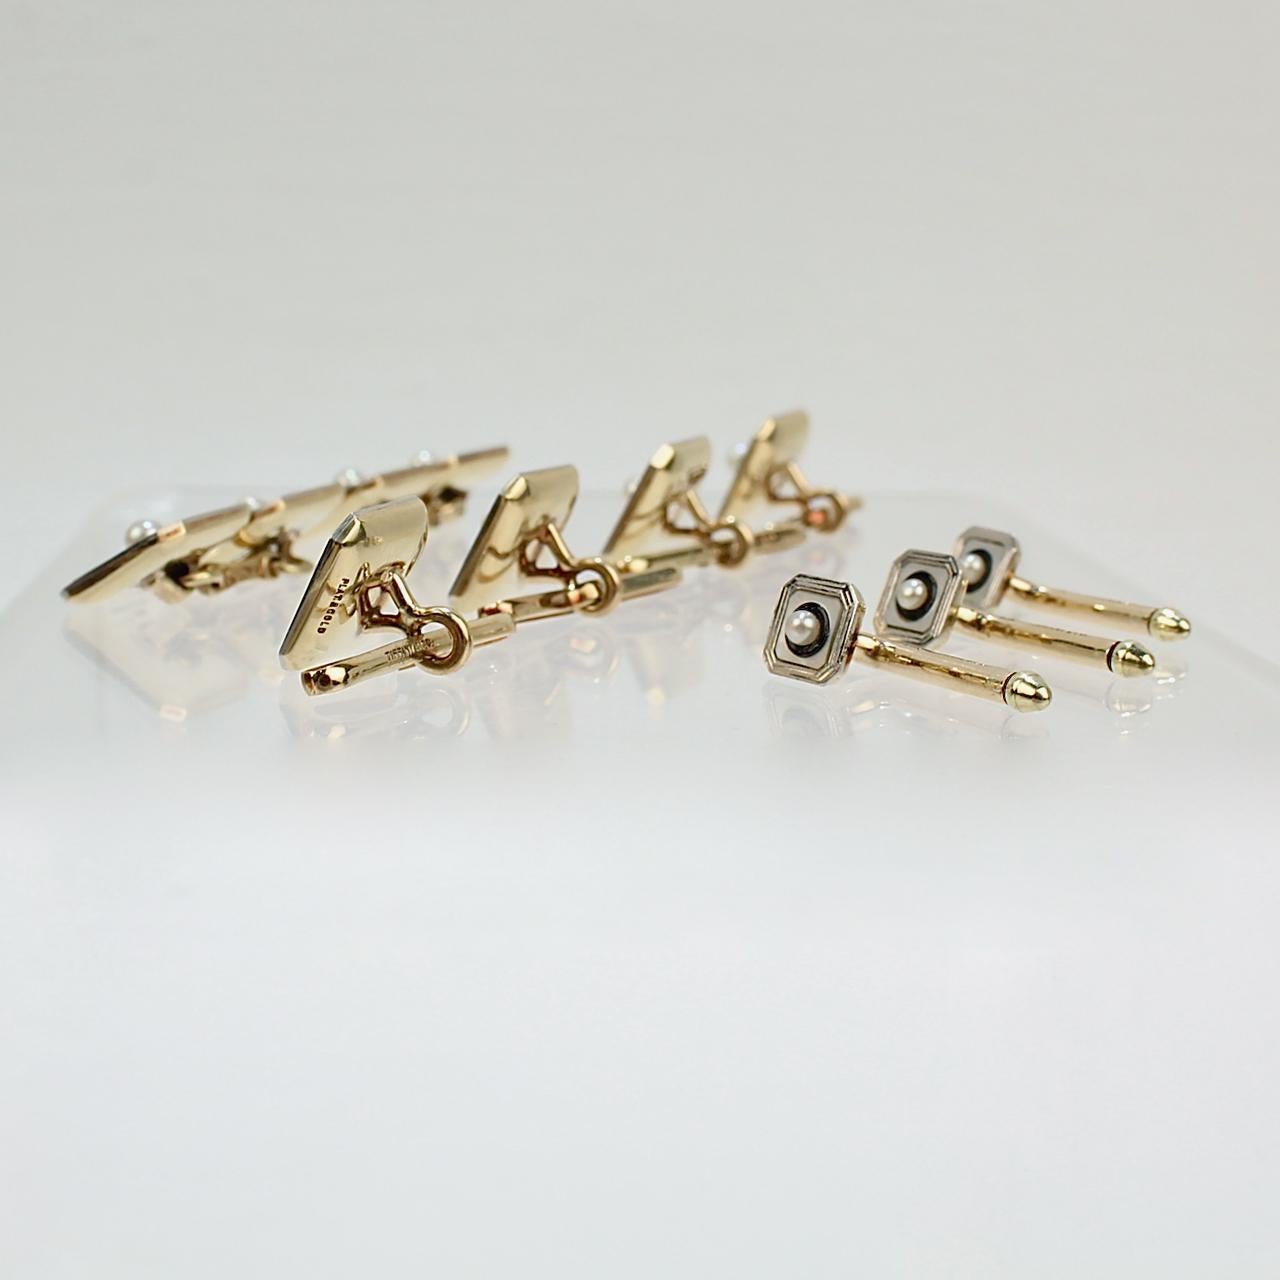 Tiffany & Co Art Deco Cufflink Dress Set in 14K Gold & Platinum with Seed Pearls 2